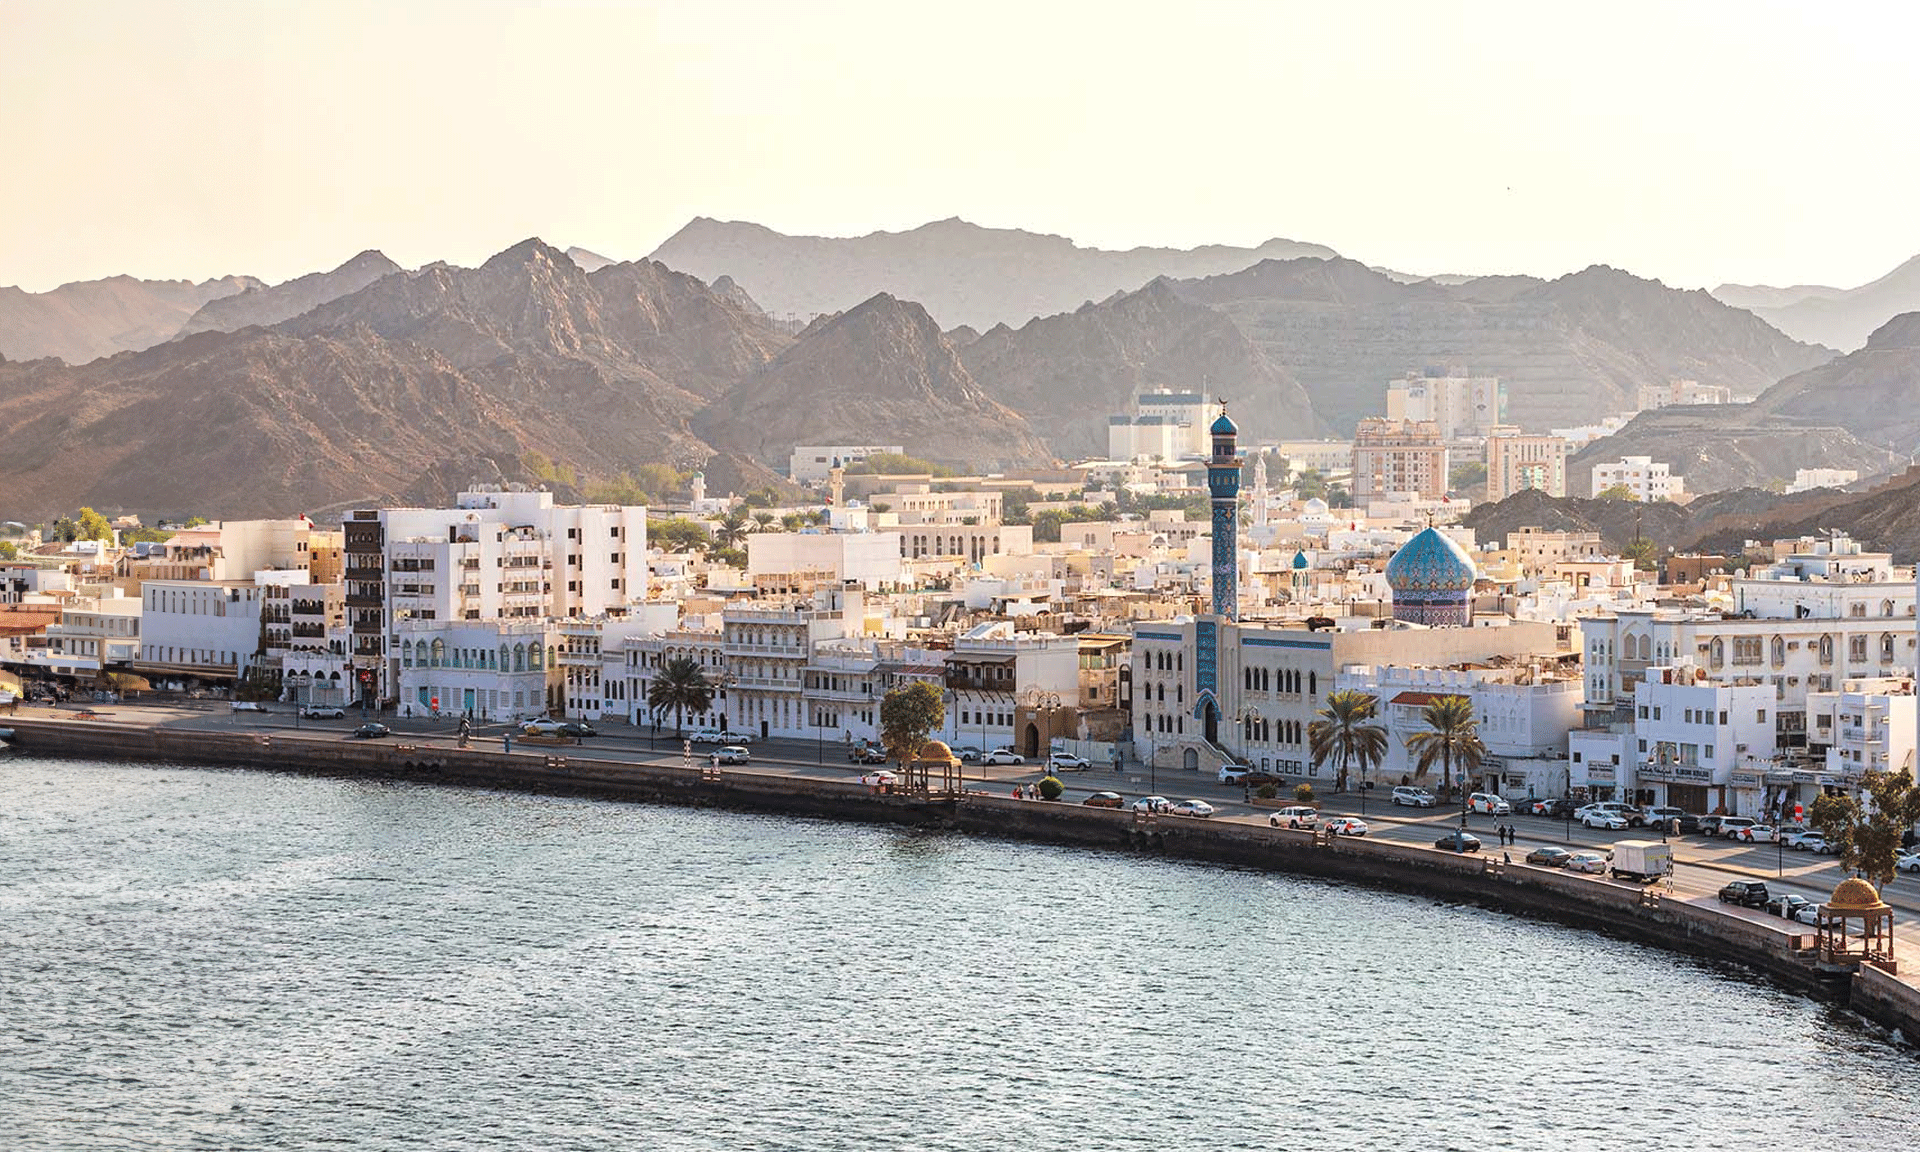 Oman Introduces New Foreign Capital Investment Law (FCIL) Listing 70 Prohibited Activities